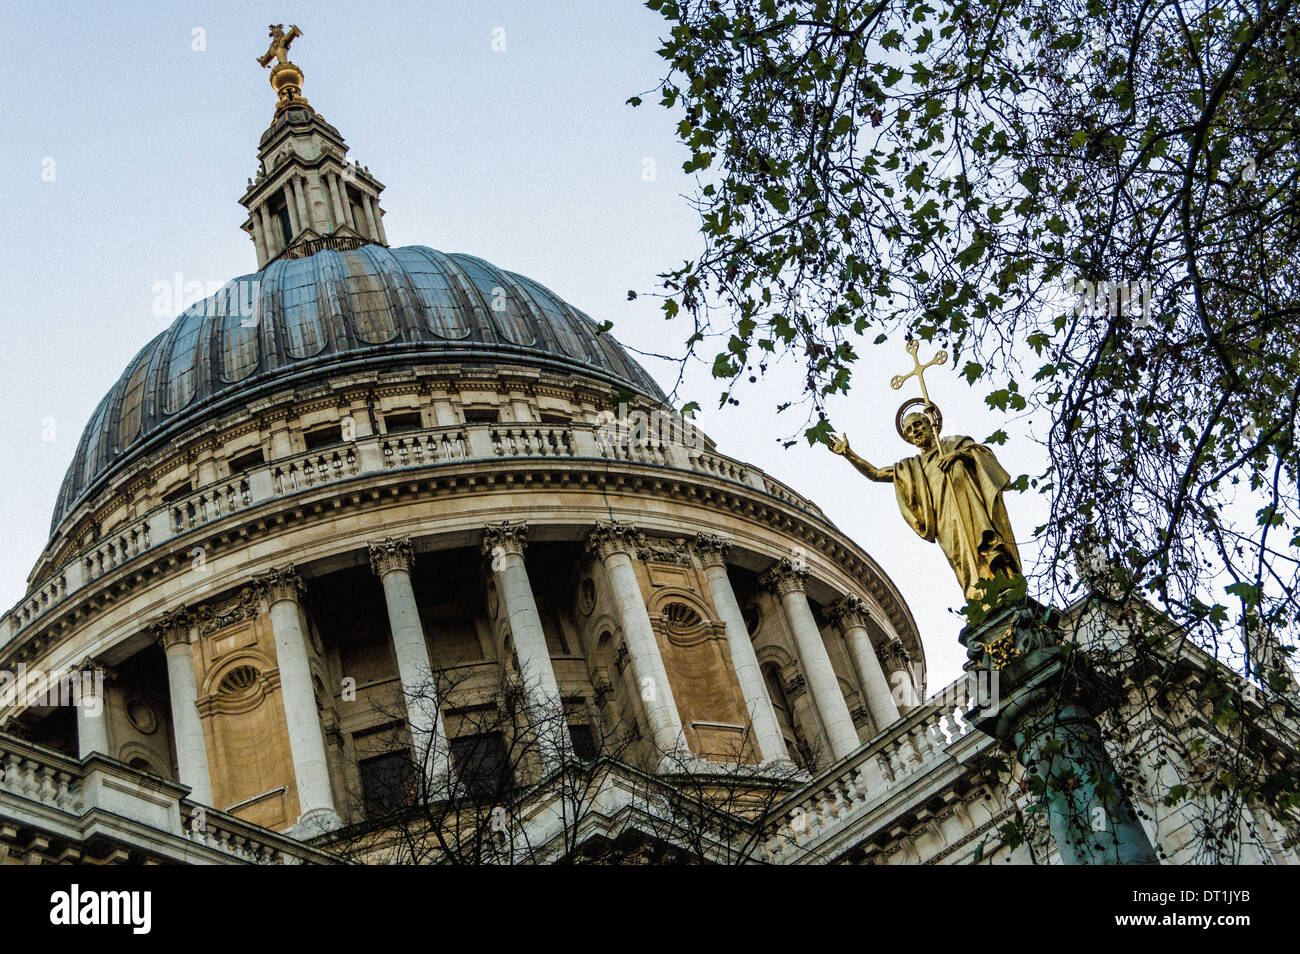 St Paul's Cross memorial statue and dome of St Paul's Cathedral in St Paul's Churchyard, London. Stock Photo